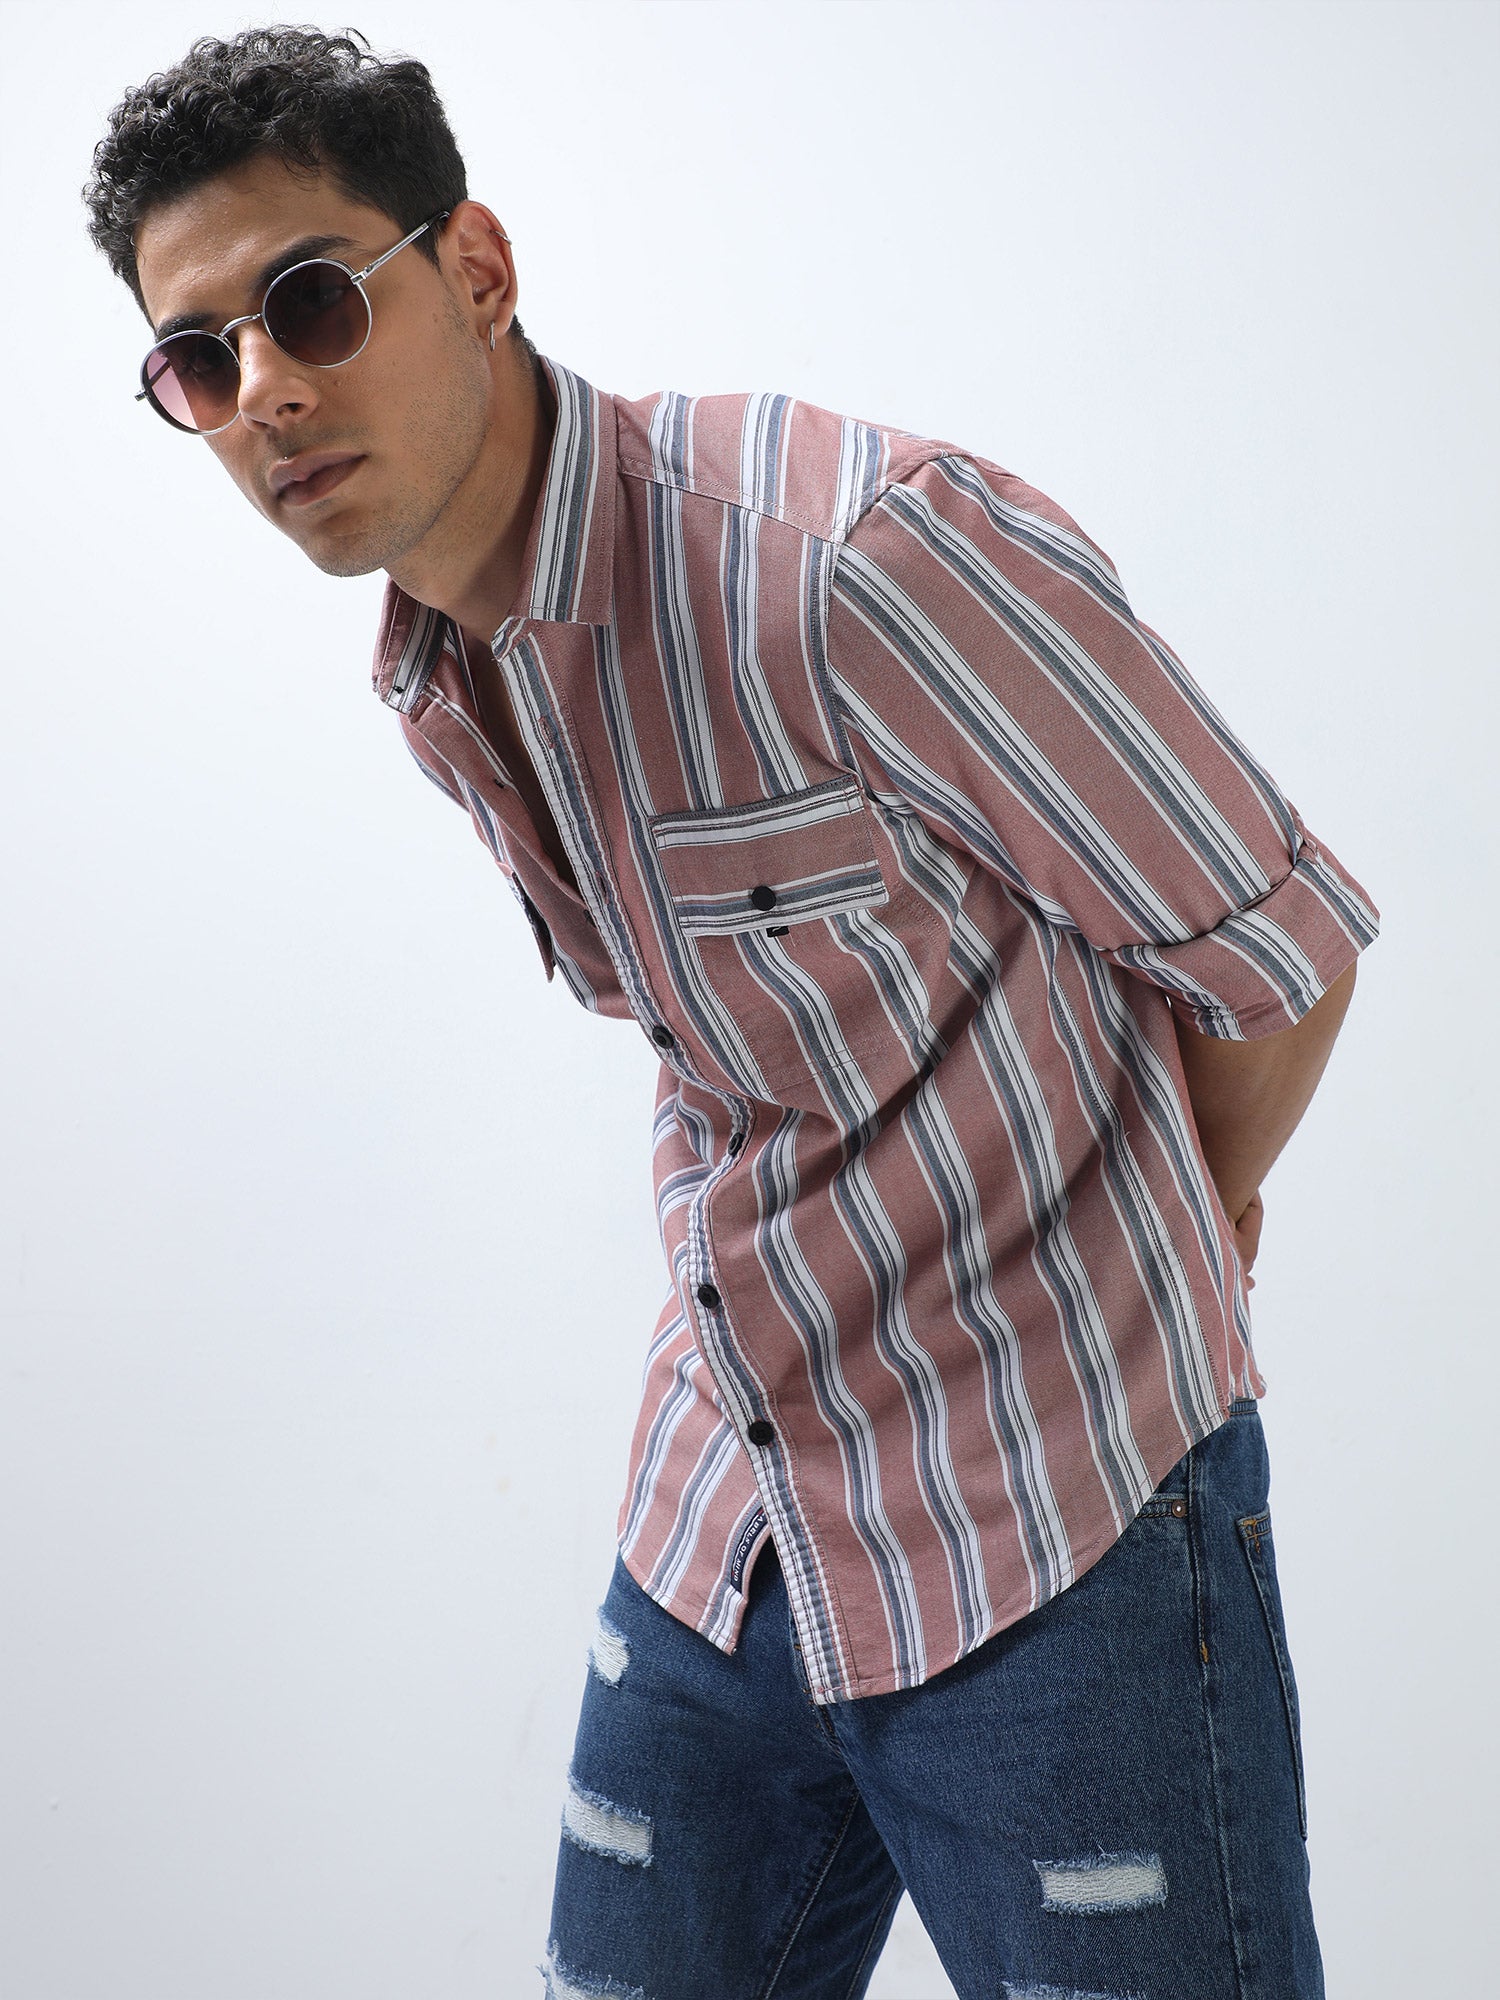 Buy Stylish Red Cotton Striped Shirt For Men OnlineRs. 1349.00